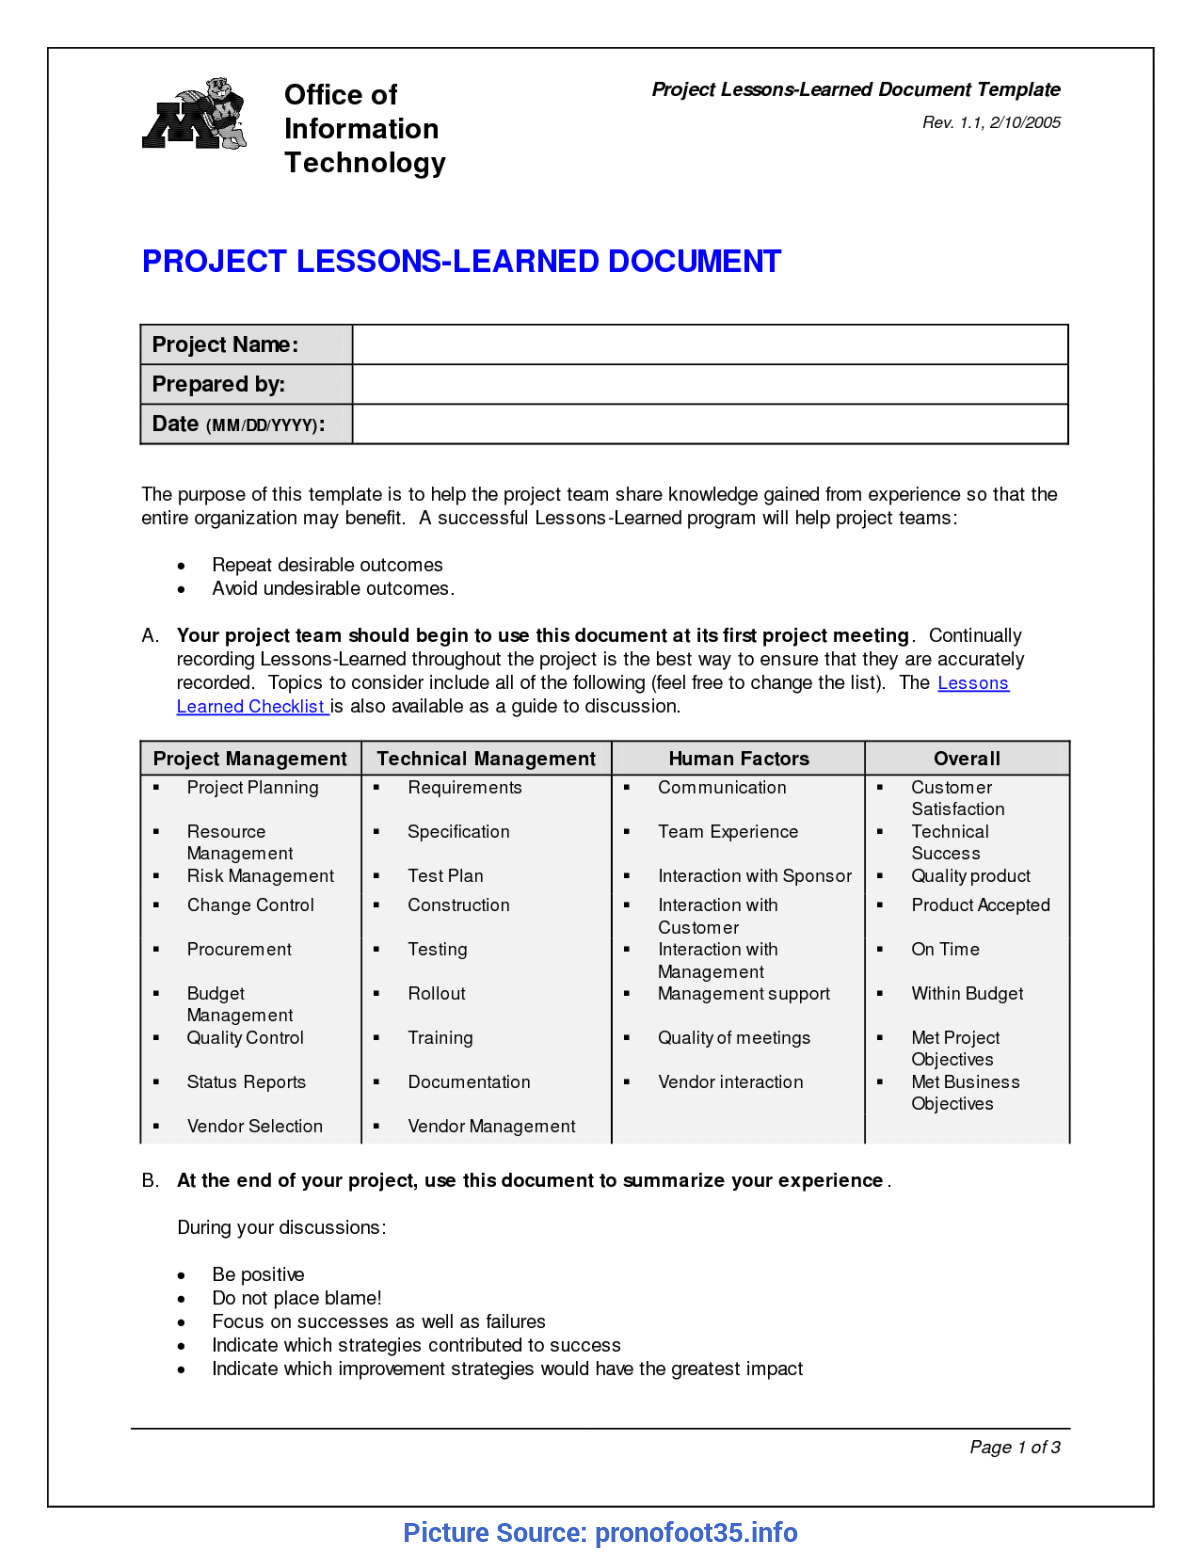 Fresh Project Management Lessons Learned Report Lessons Learnt in Lessons Learnt Report Template